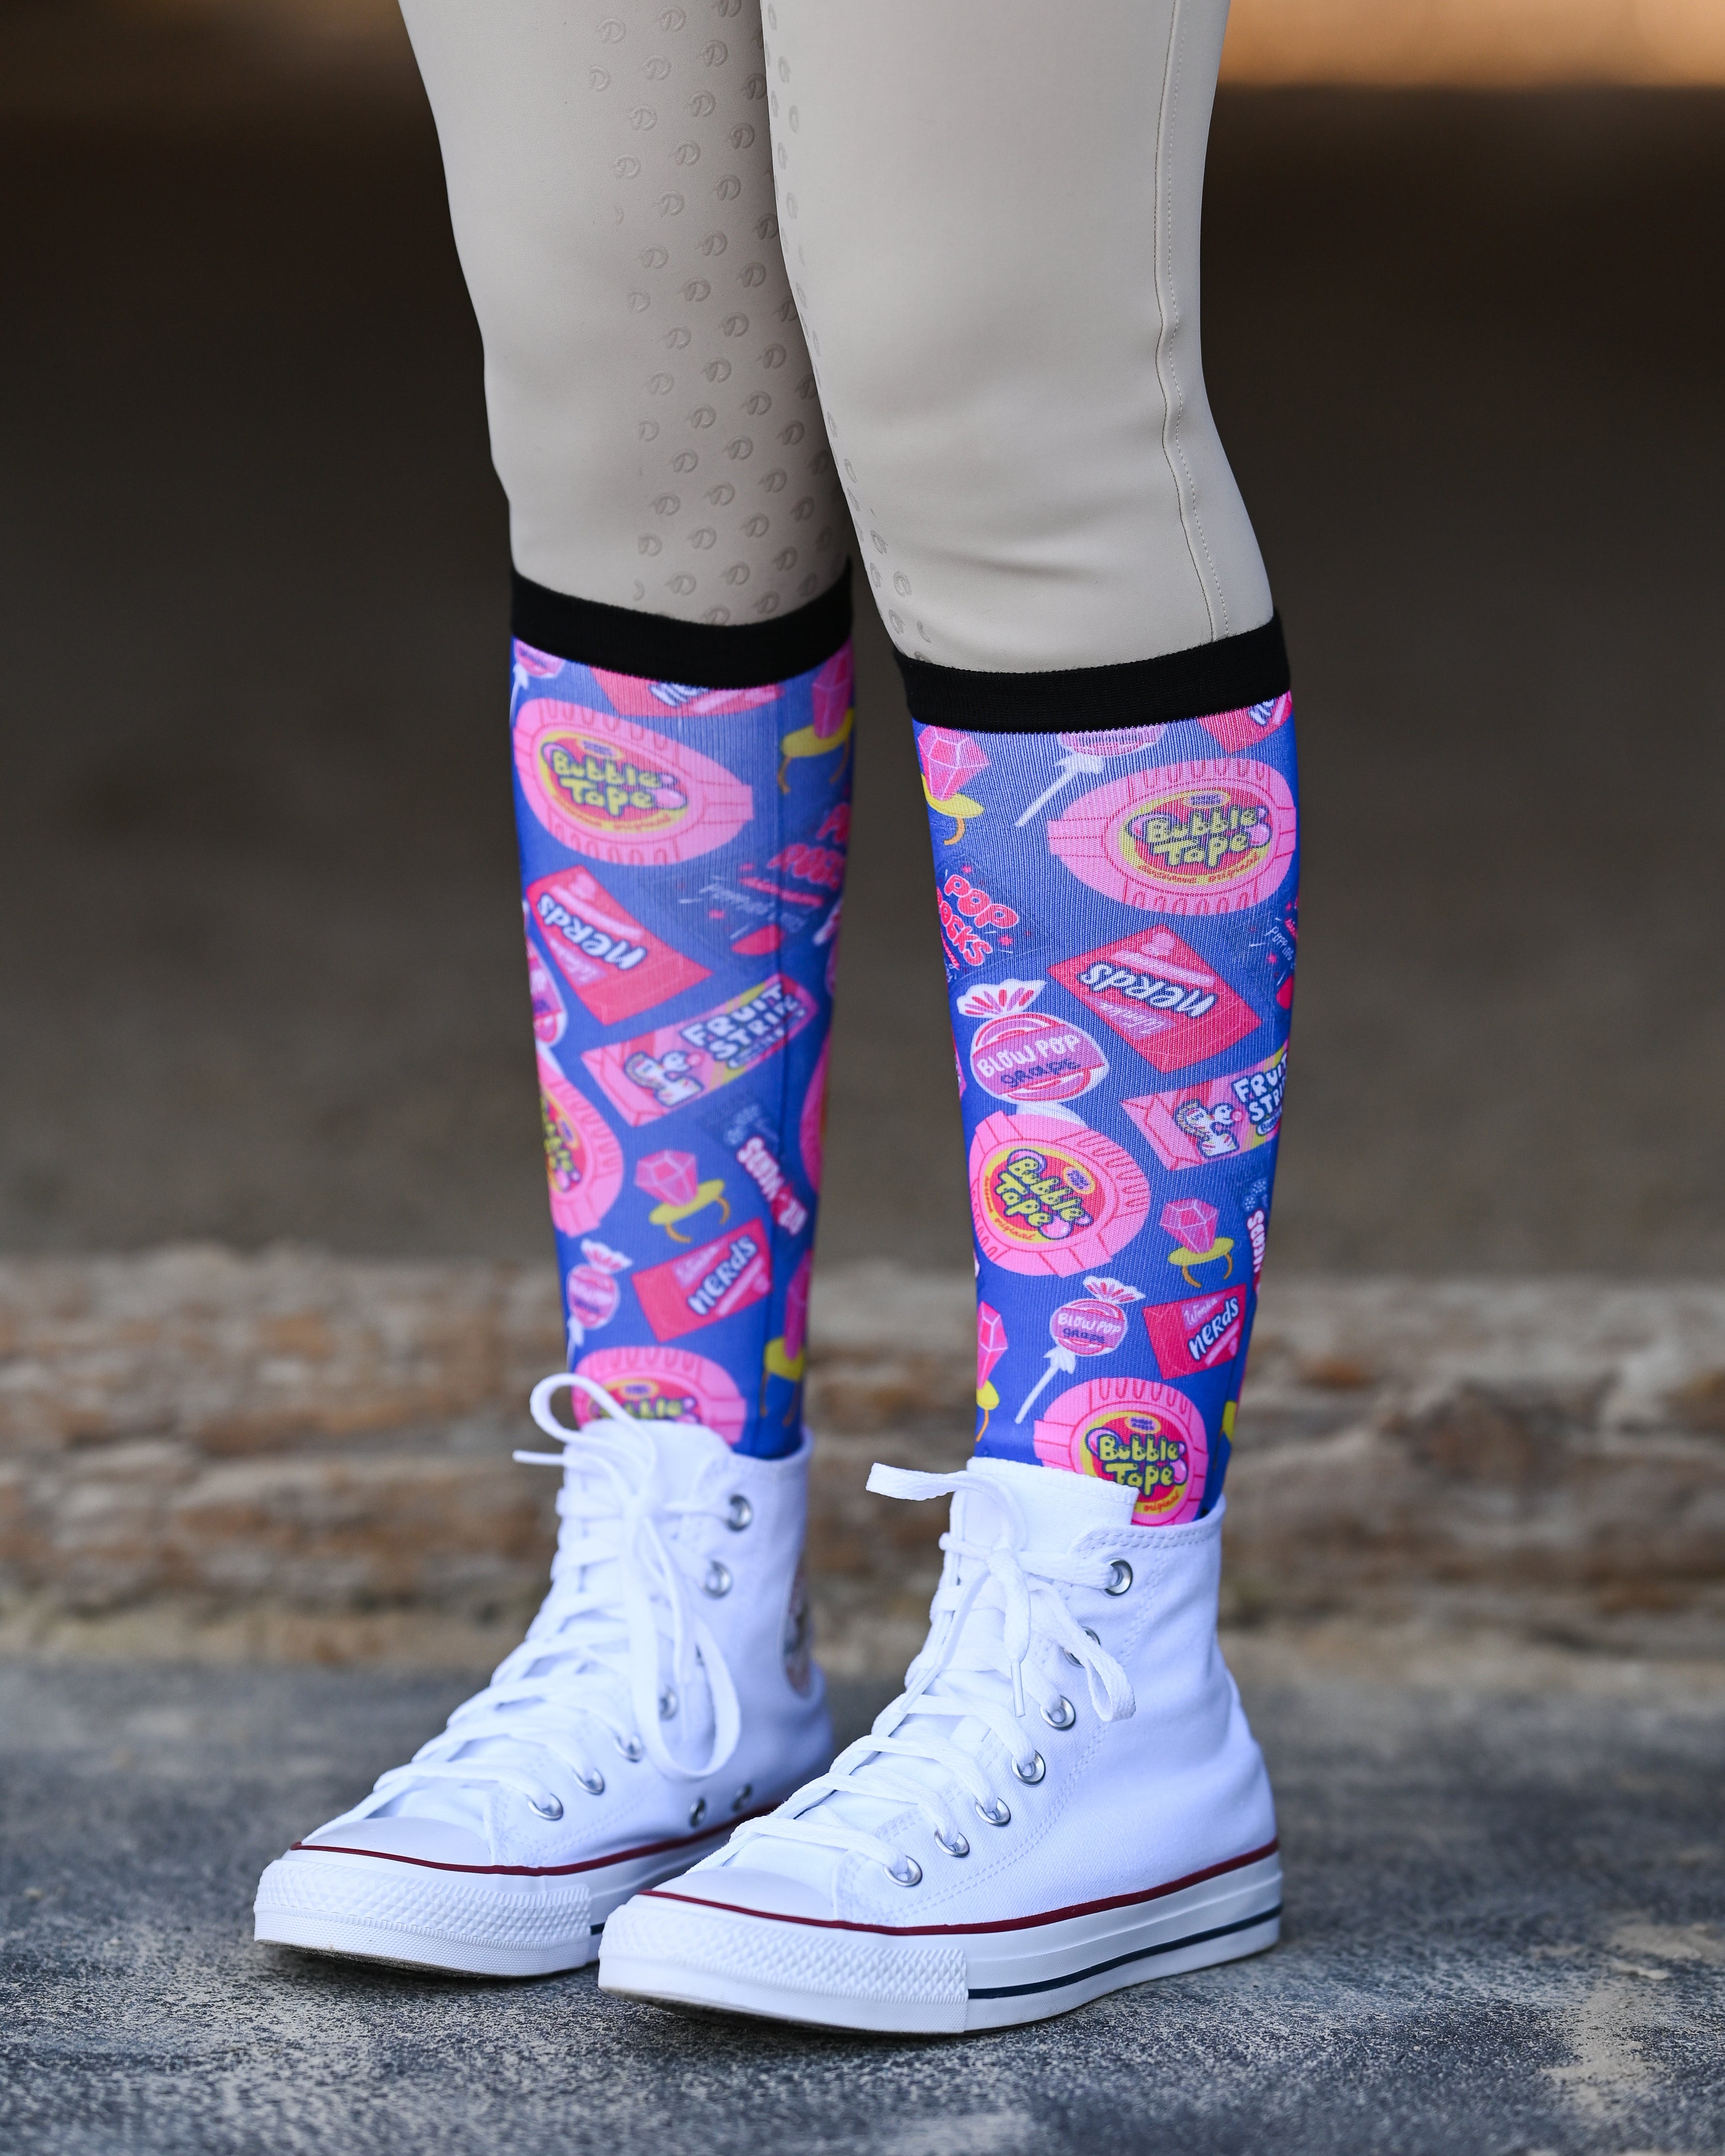 dreamers & schemers Pair & A Spare Yes We Candy Youth Pair & a Spare equestrian boot socks boot socks thin socks riding socks pattern socks tall socks funny socks knee high socks horse socks horse show socks